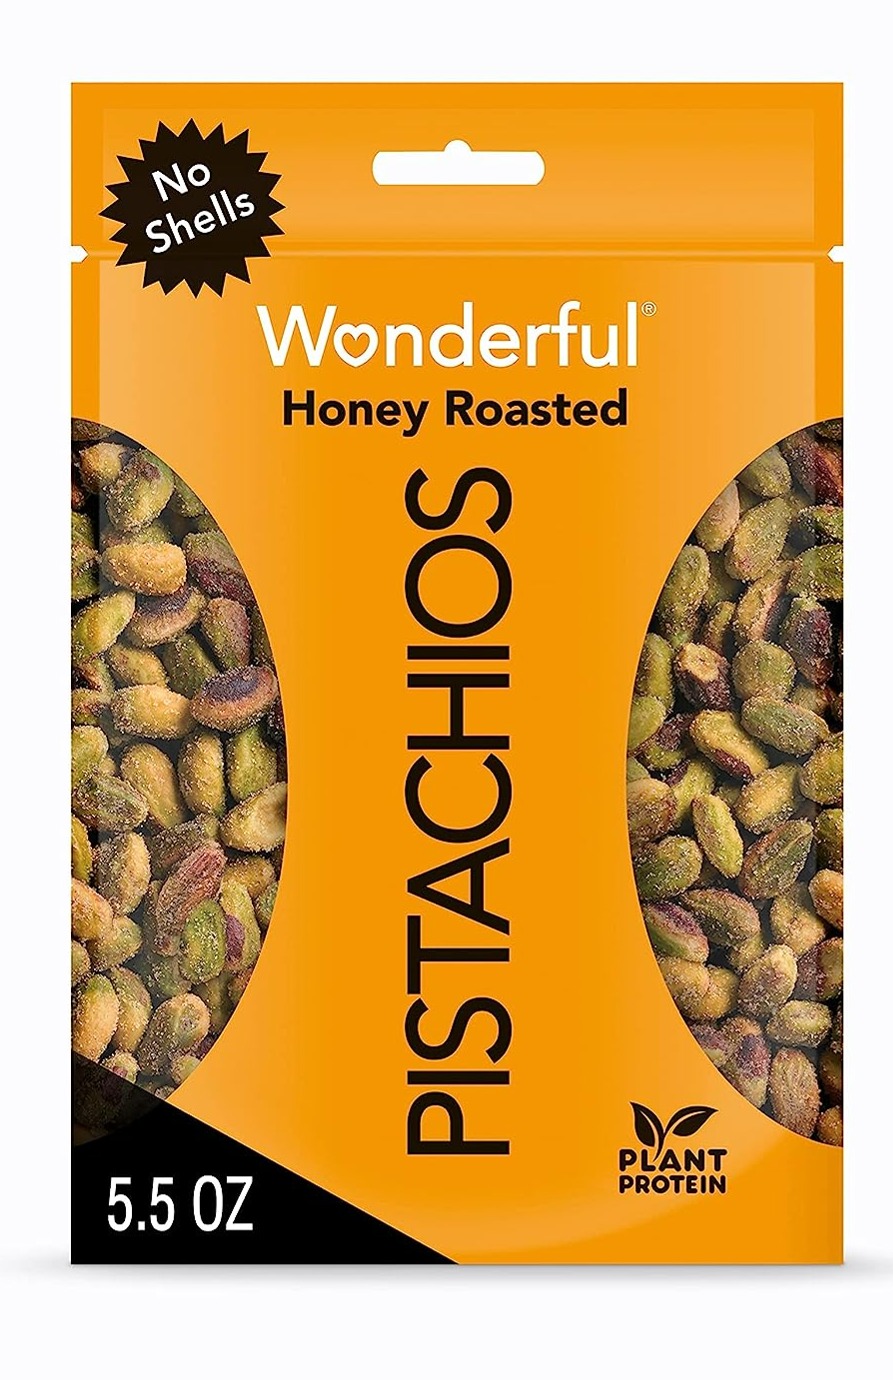 5.5-Oz Wonderful Honey Roasted Pistachios (No Shells) $3.37 w/ S&S + Free Shipping w/ Prime or on orders over $35